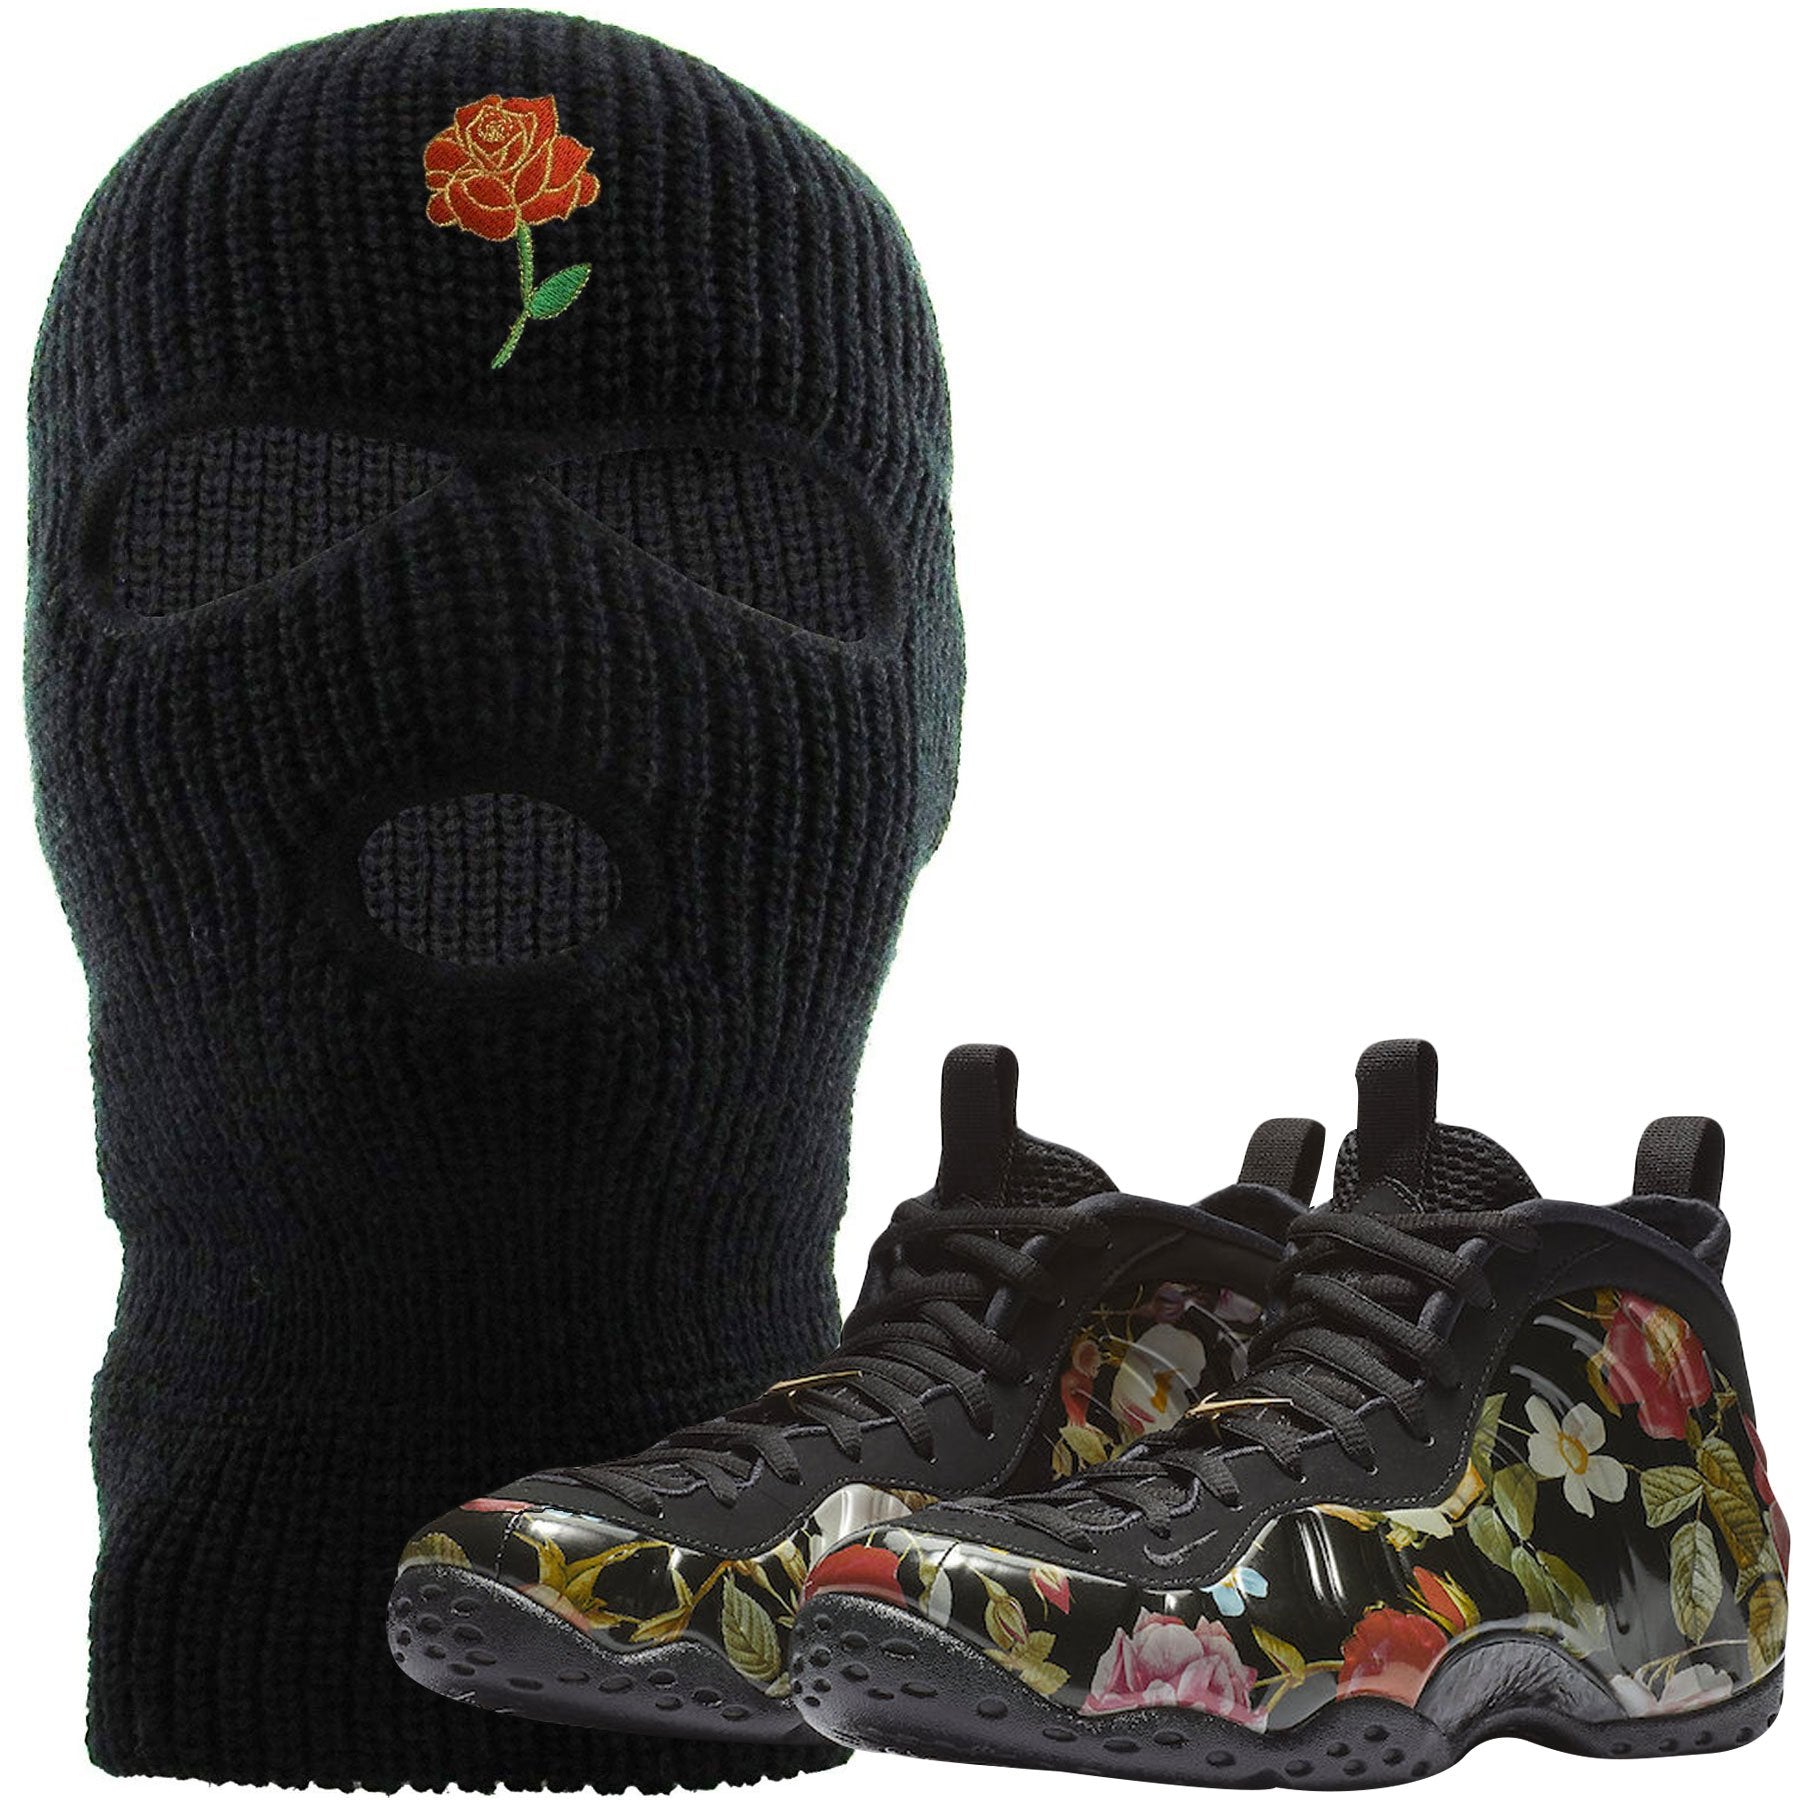 Wear this sneaker matching ski mask to match your Air Foamposite One Floral sneakers. Match your floral foams today!